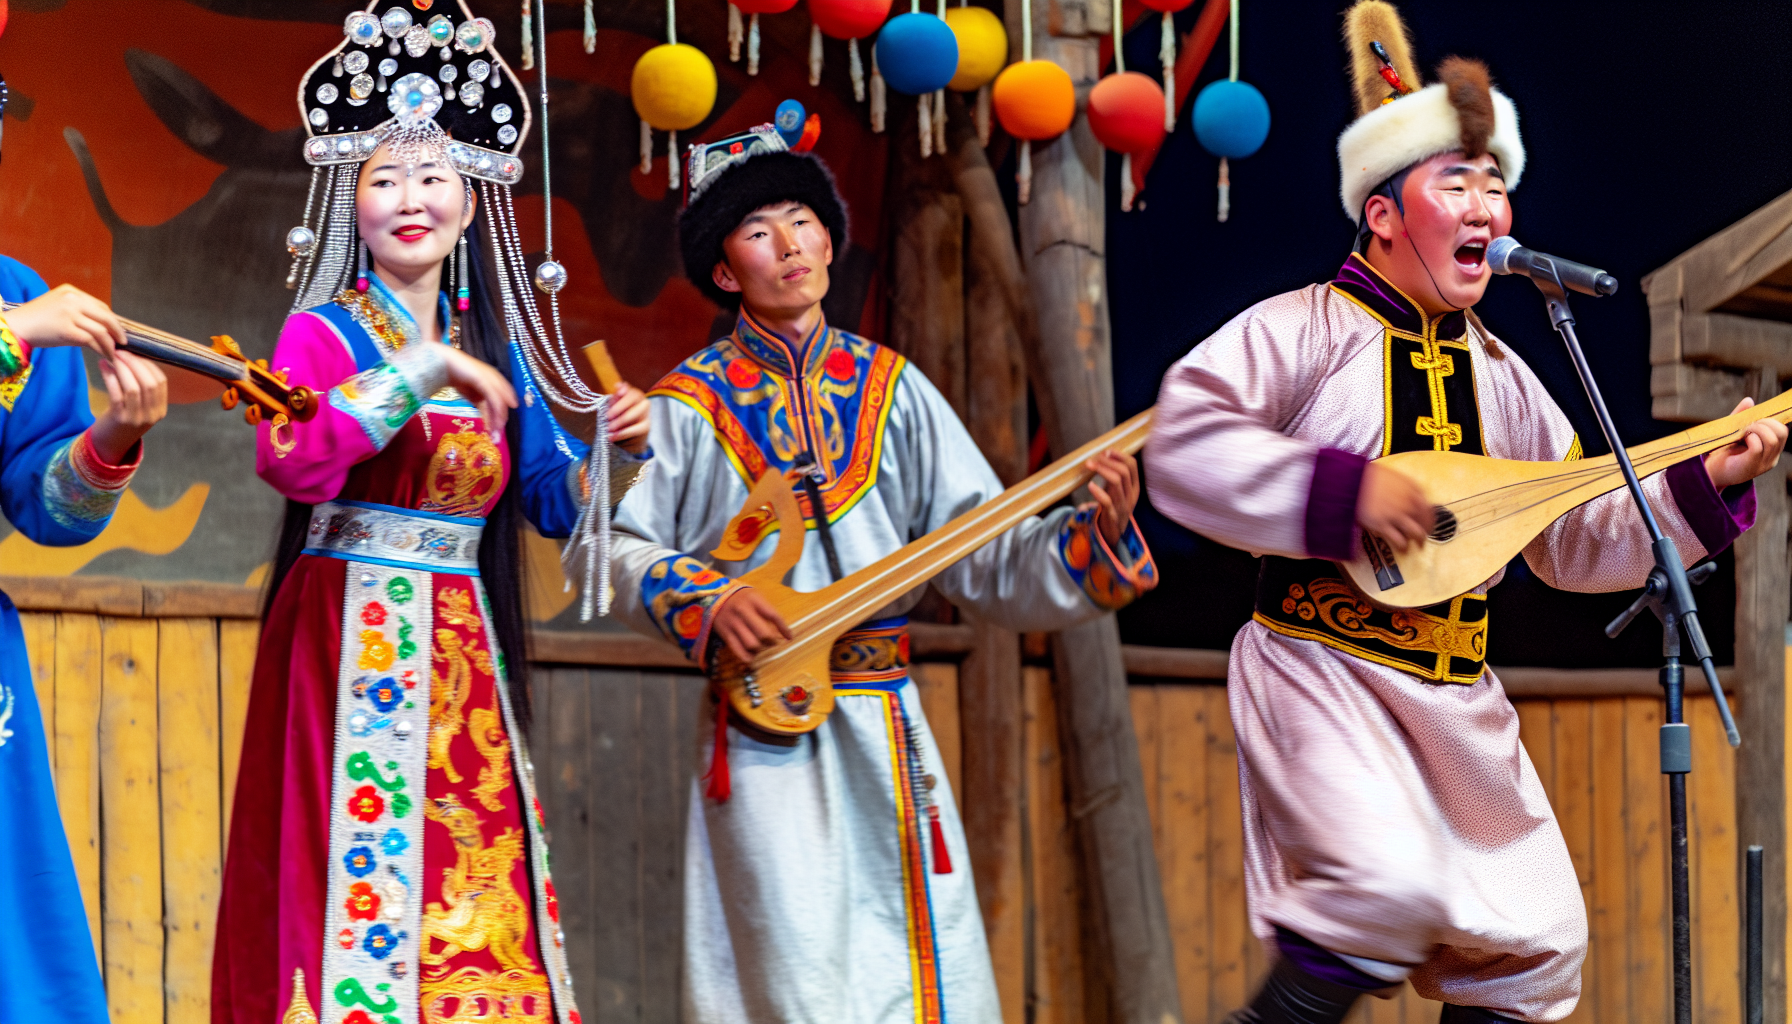 A cultural performance showcasing traditional Mongolian dances and music, offering a rich cultural immersion in Central Mongolia during tours.